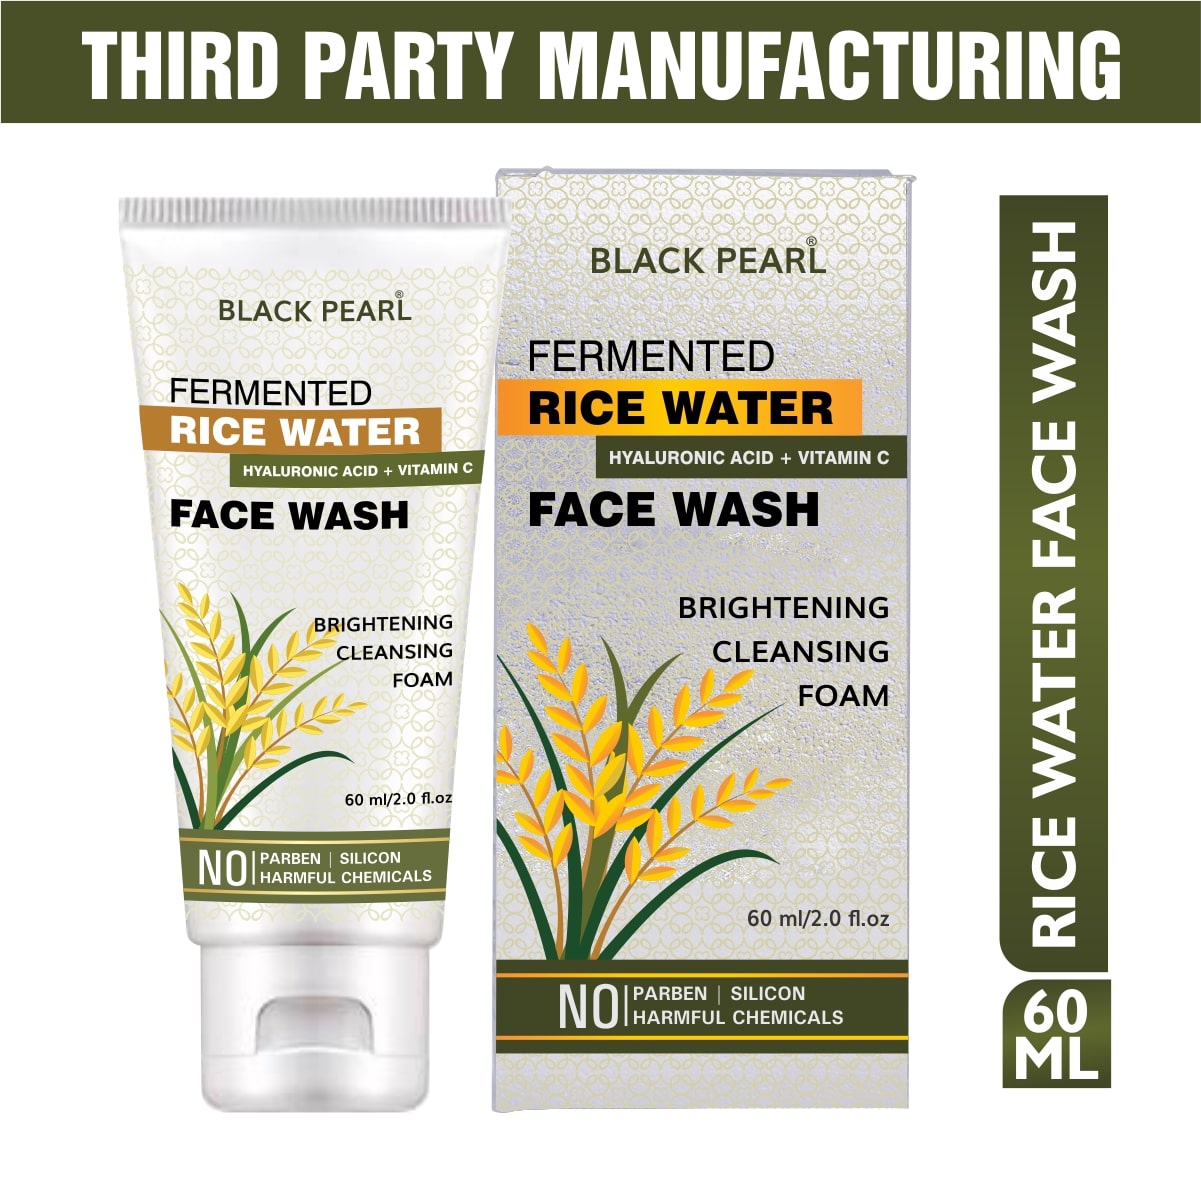 Fermented Rice Water Face Wash Third Party Manufacturing